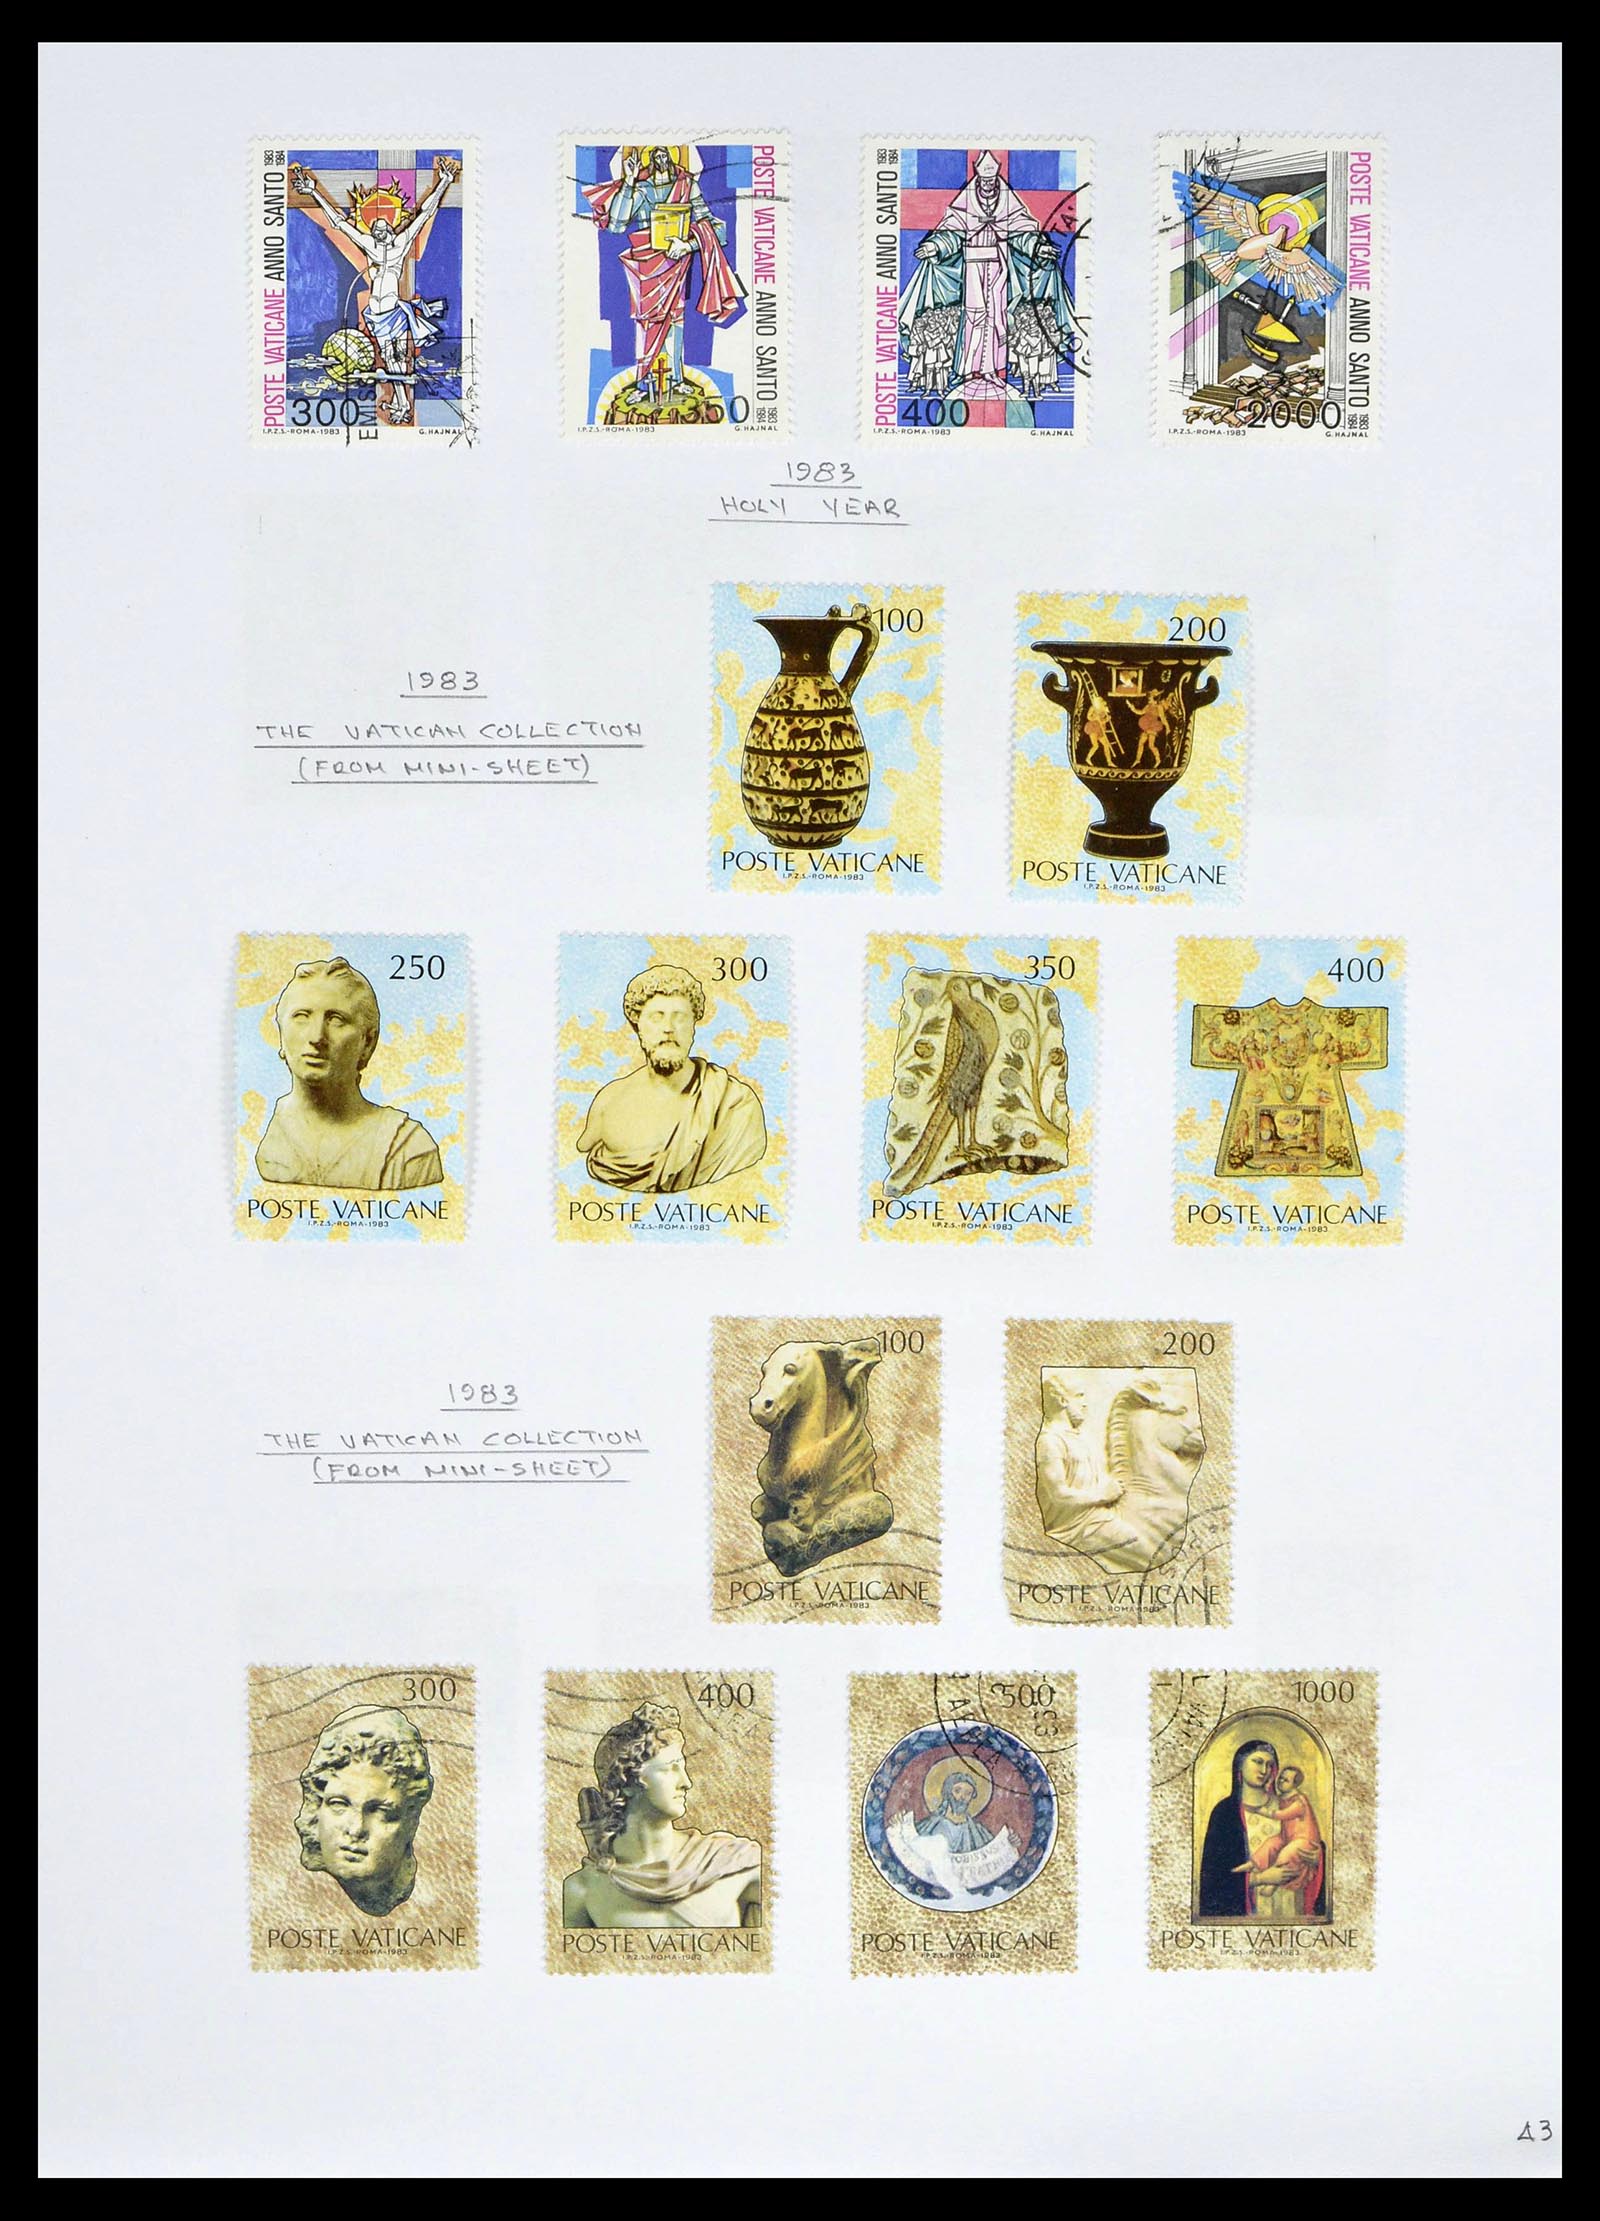 39099 0045 - Stamp collection 39099 Vatican 1852-2008.